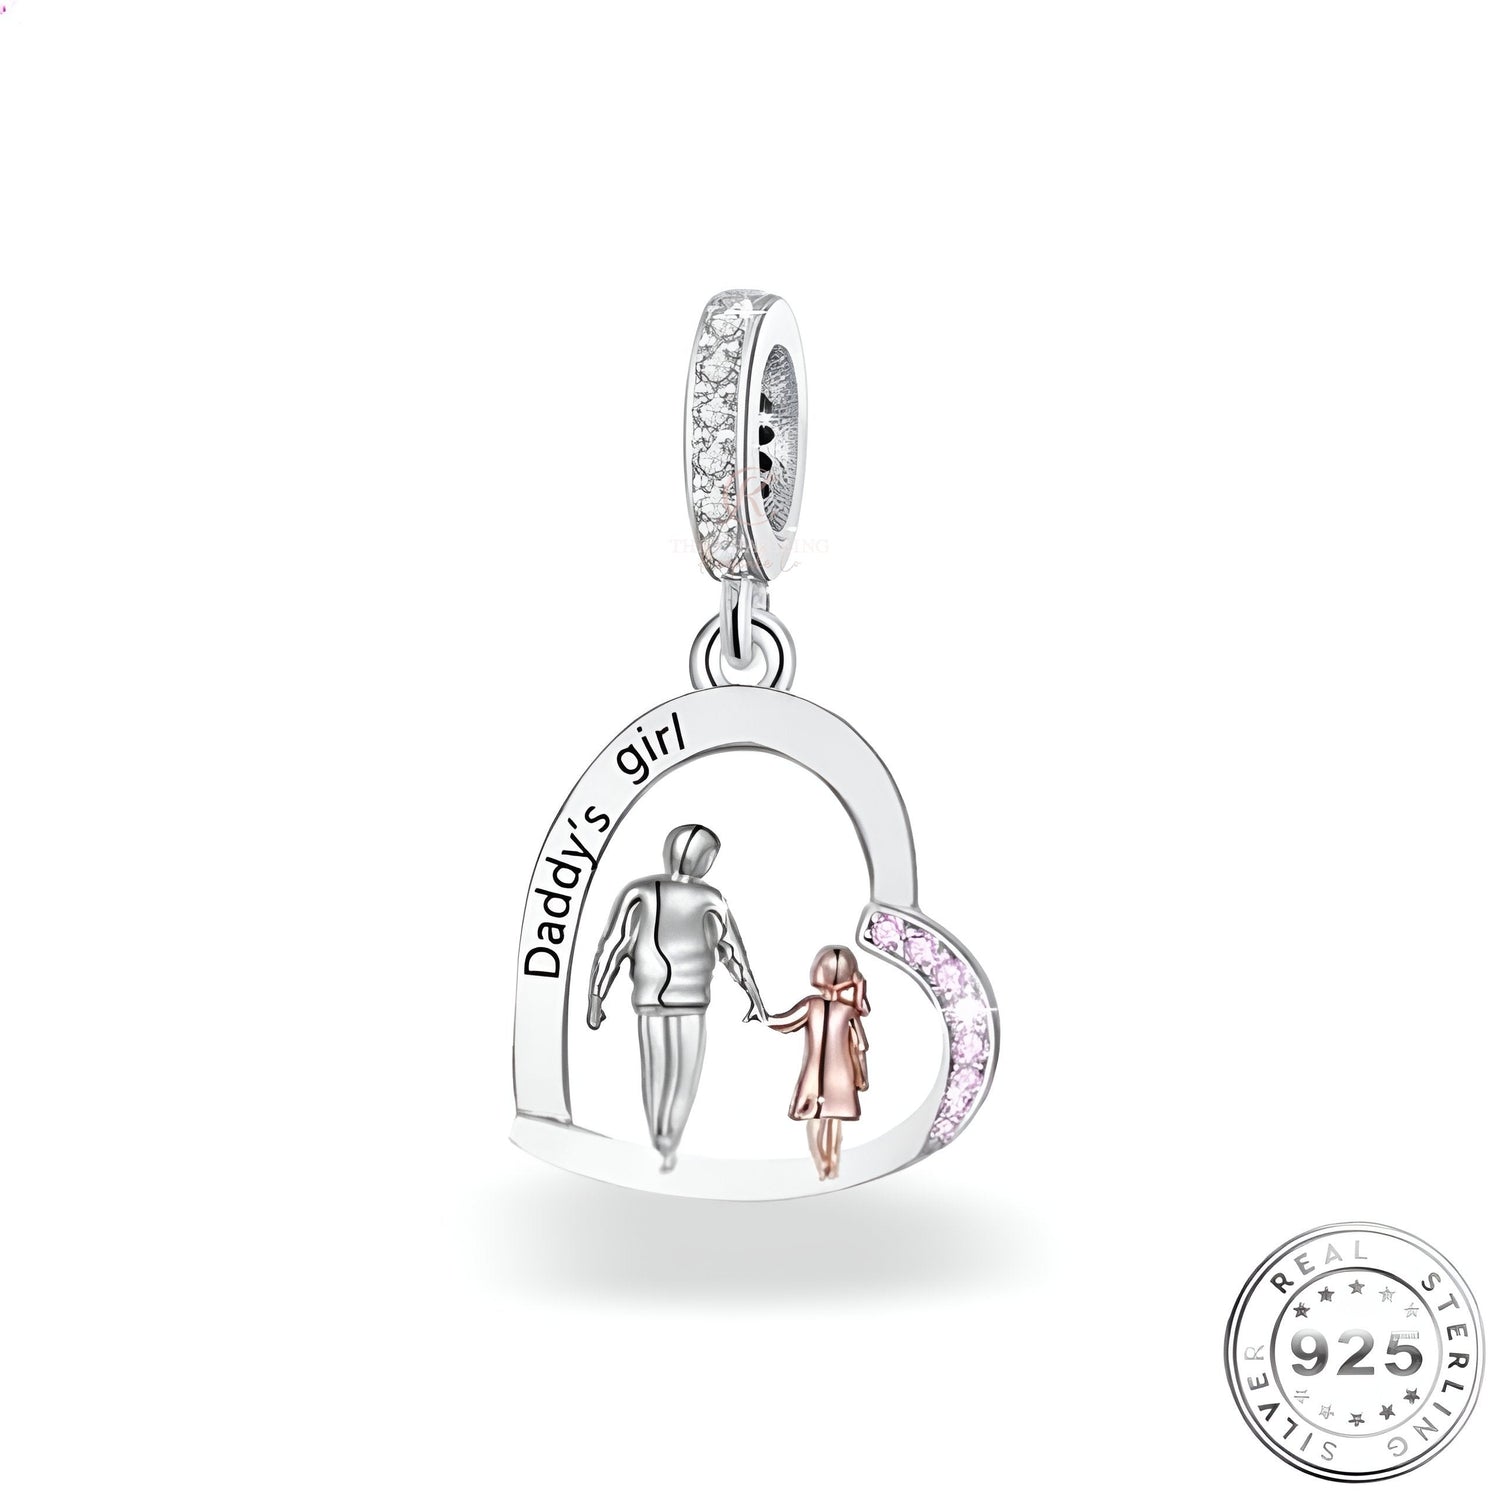 Daddys Girl Charm 925 Sterling Silver fits pandora